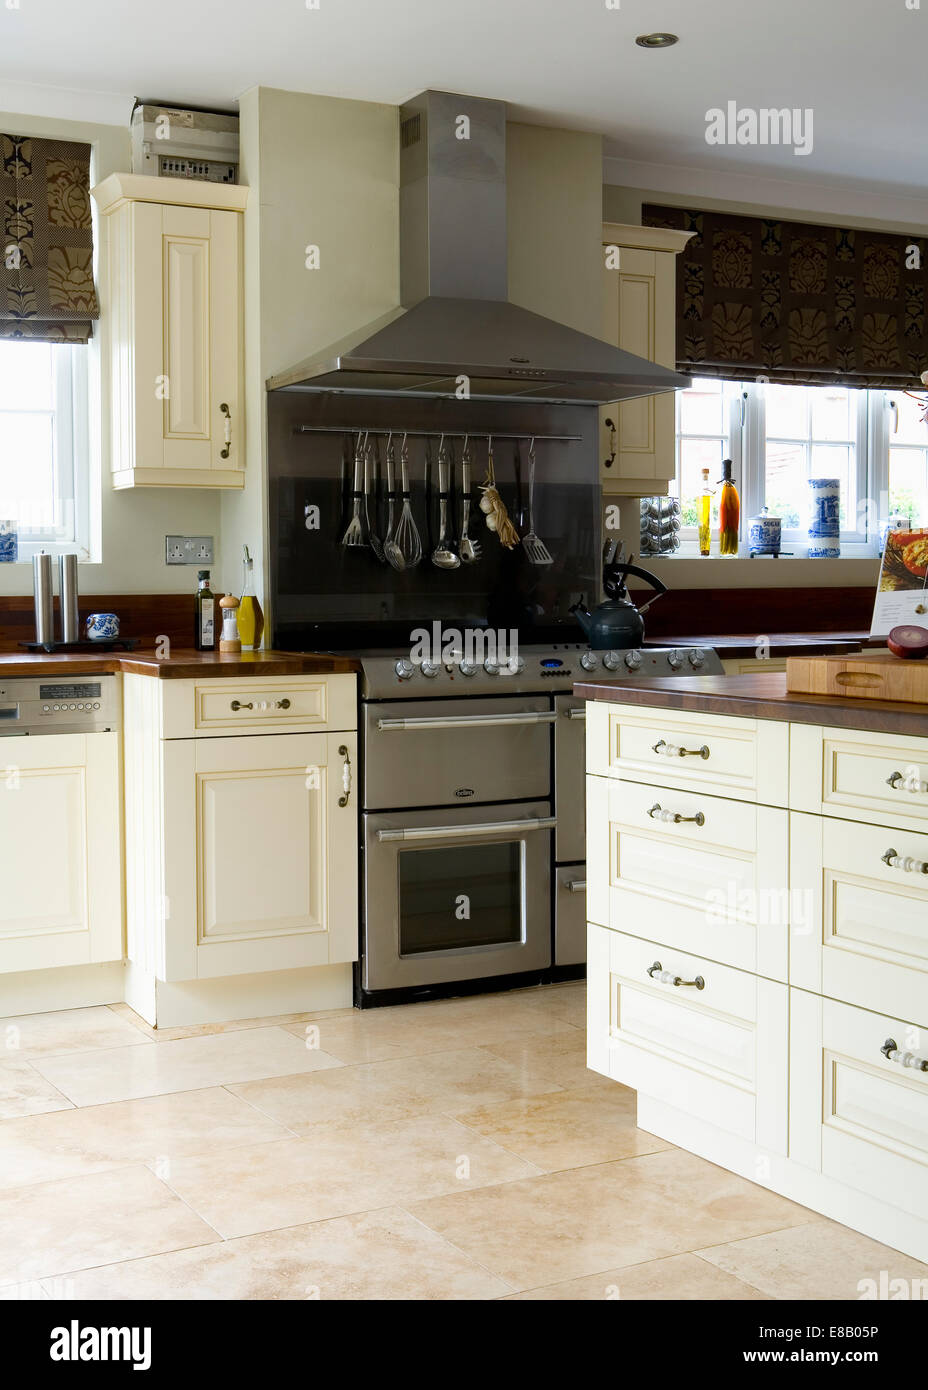 Cream travertine floor tiles in modern kitchen with large stainless steel range oven and cream fitted units Stock Photo